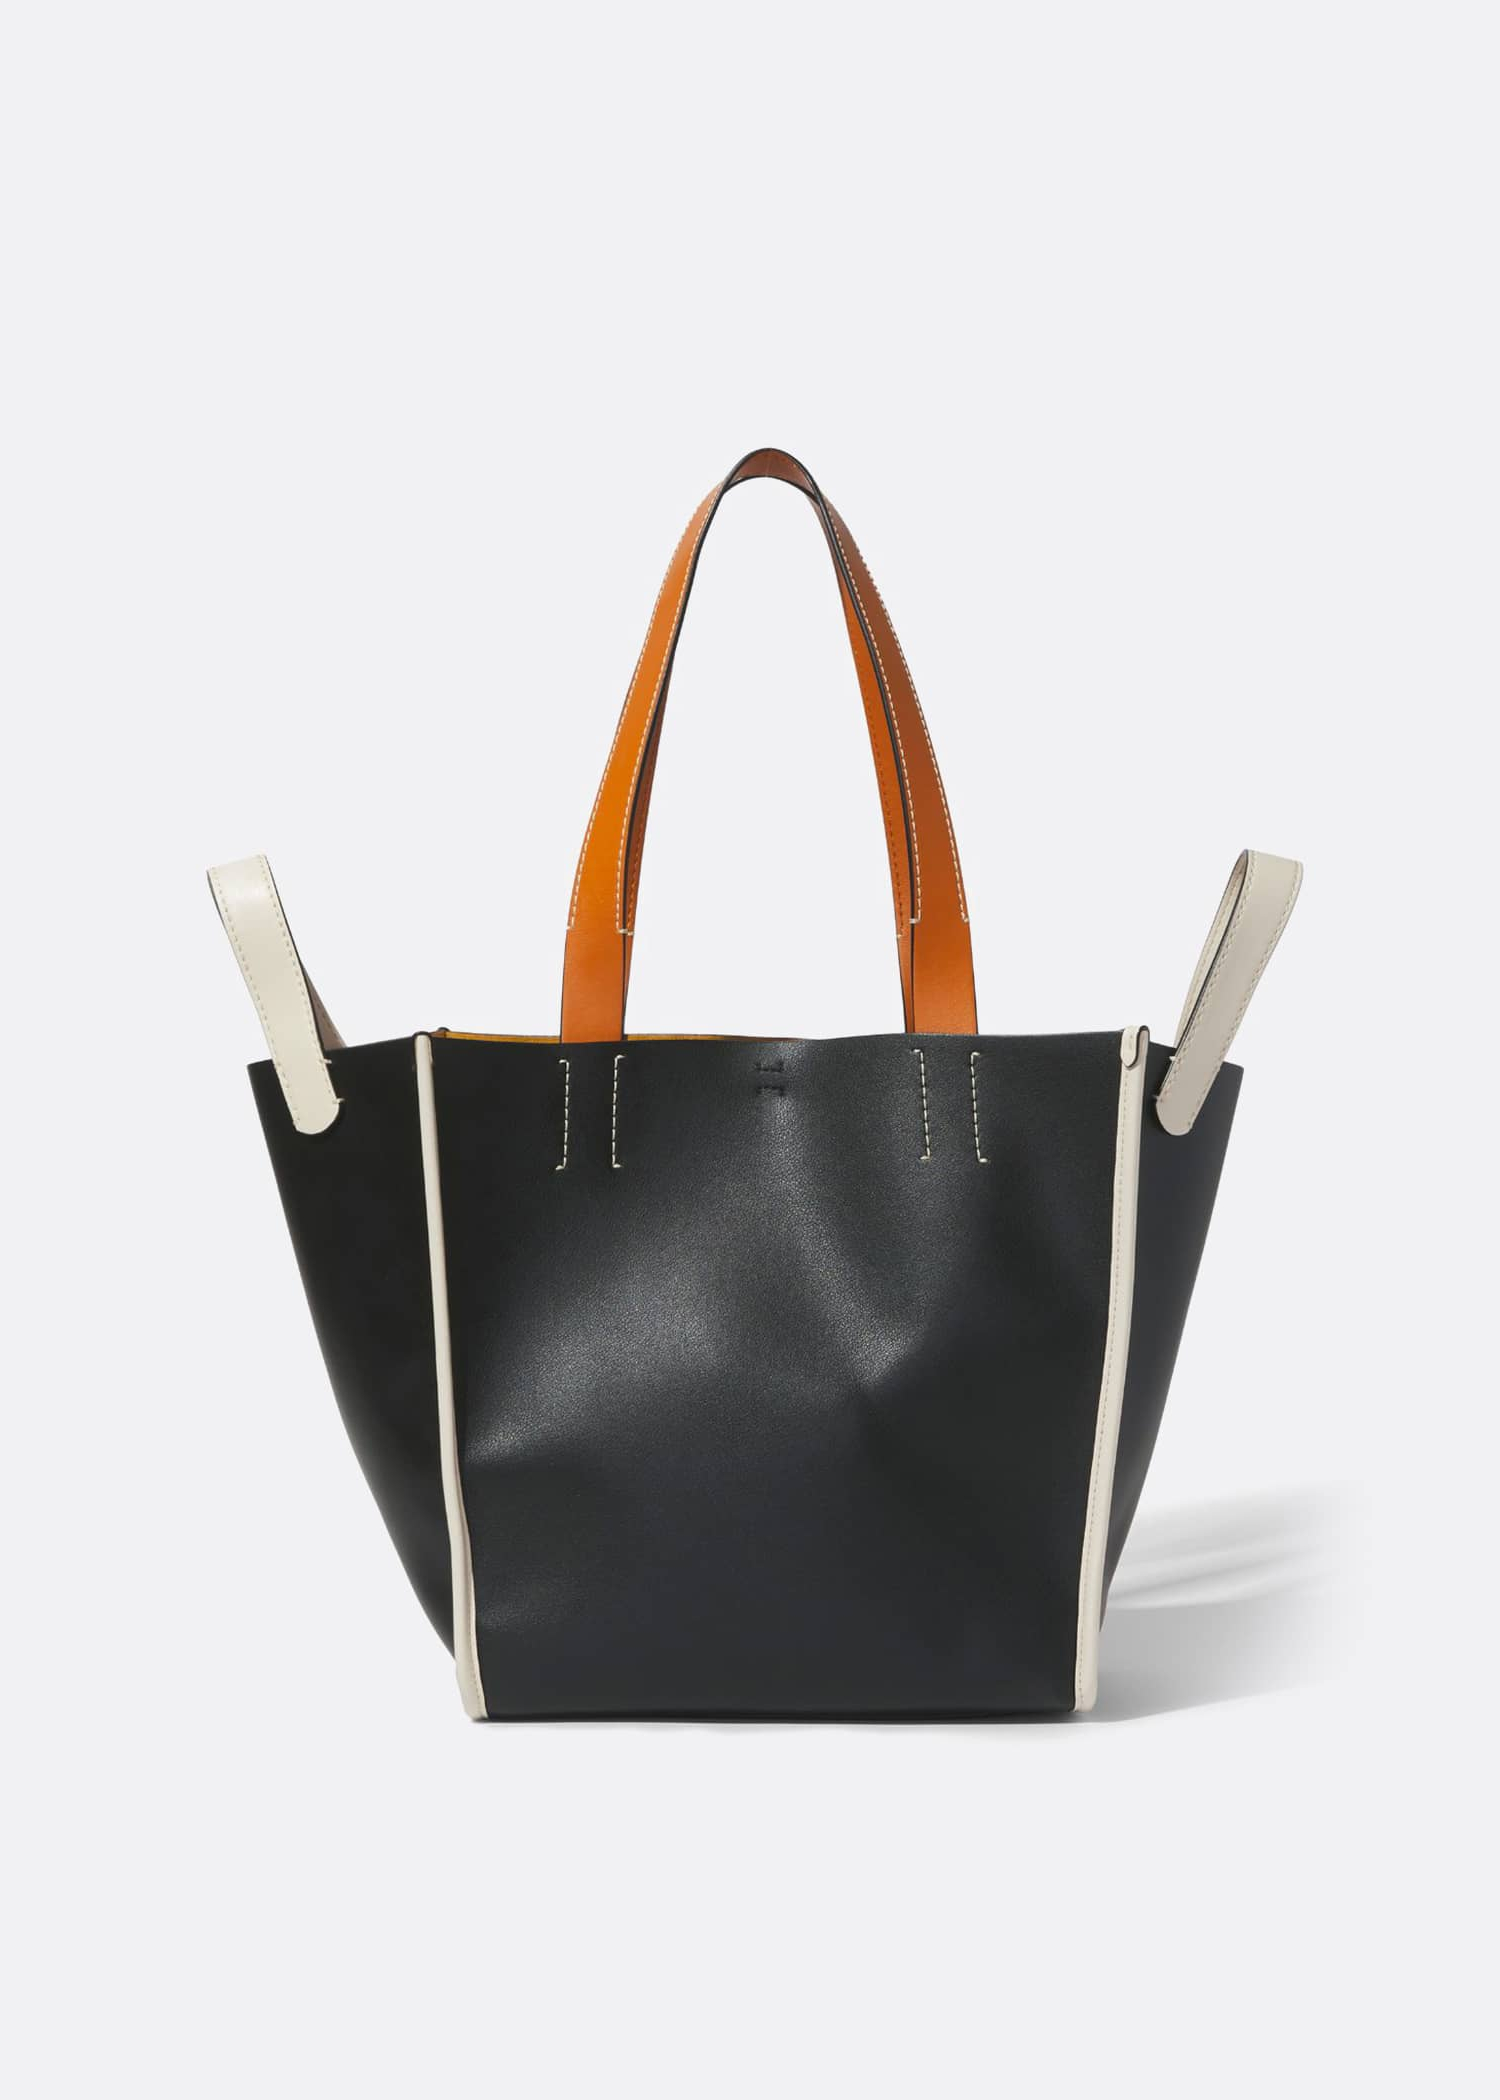 Proenza Schouler White Label Large Mercer Leather Tote